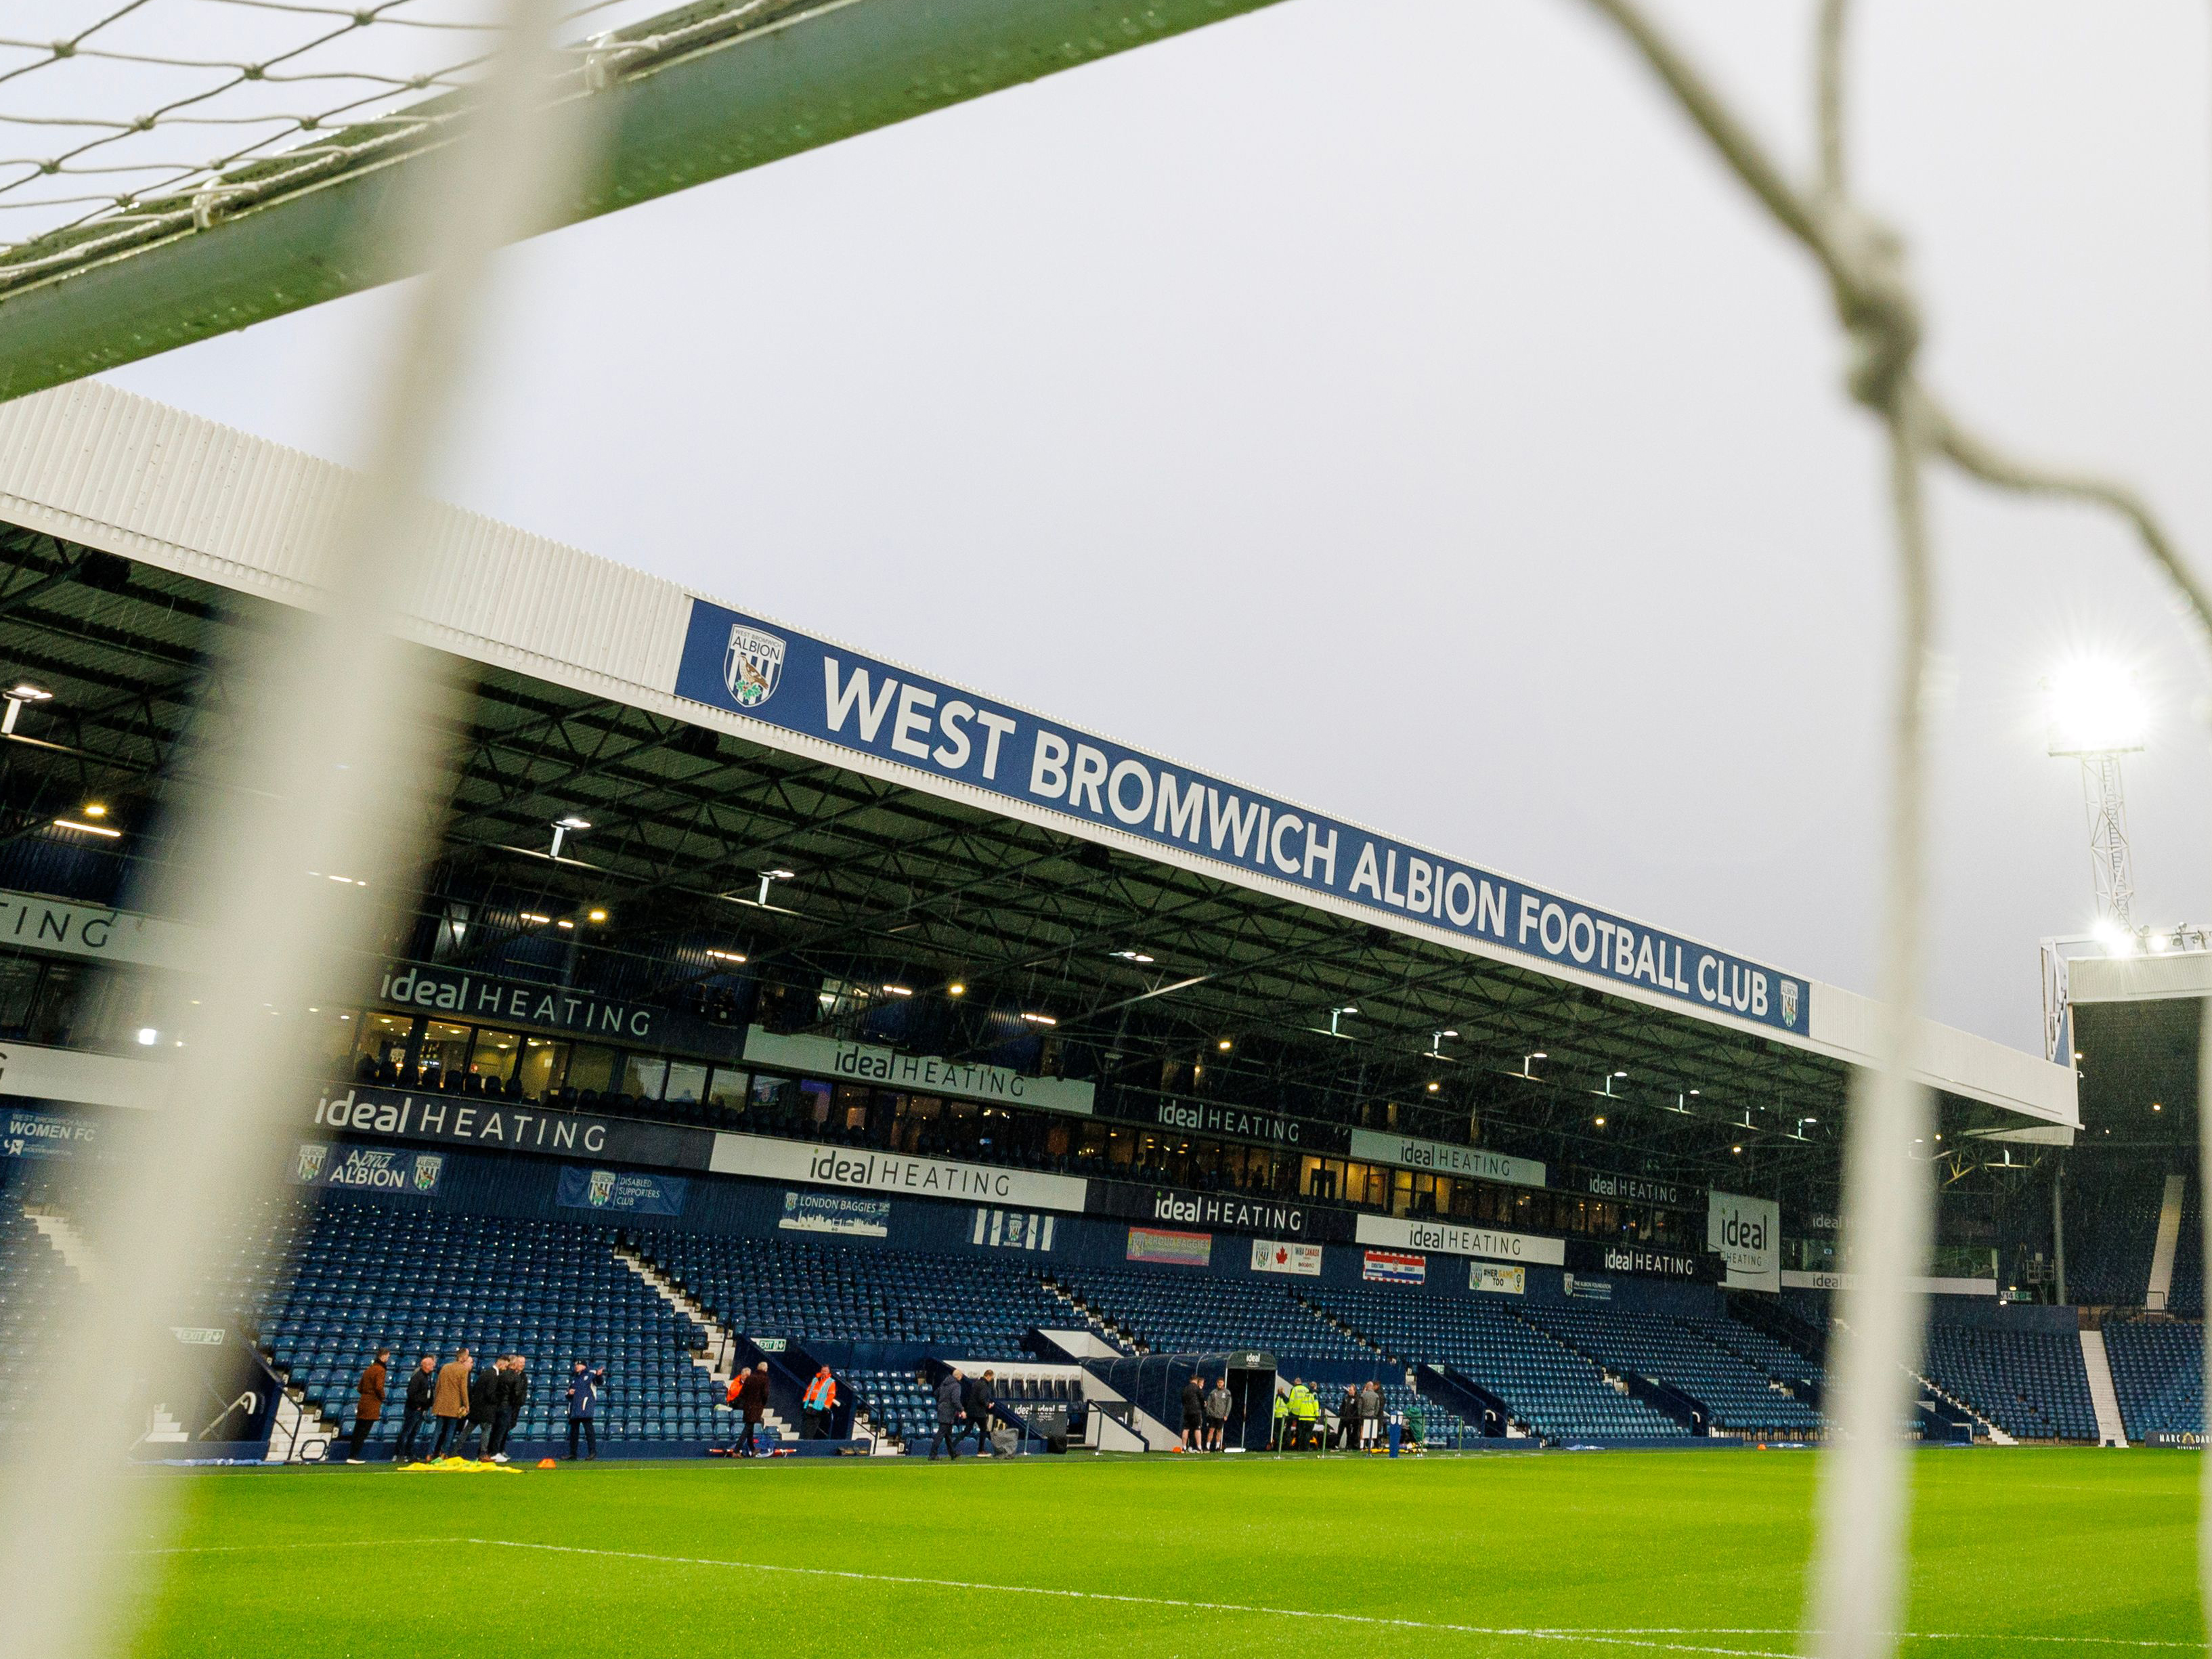 A general view of the West Stand at The Hawthorns through a goal net